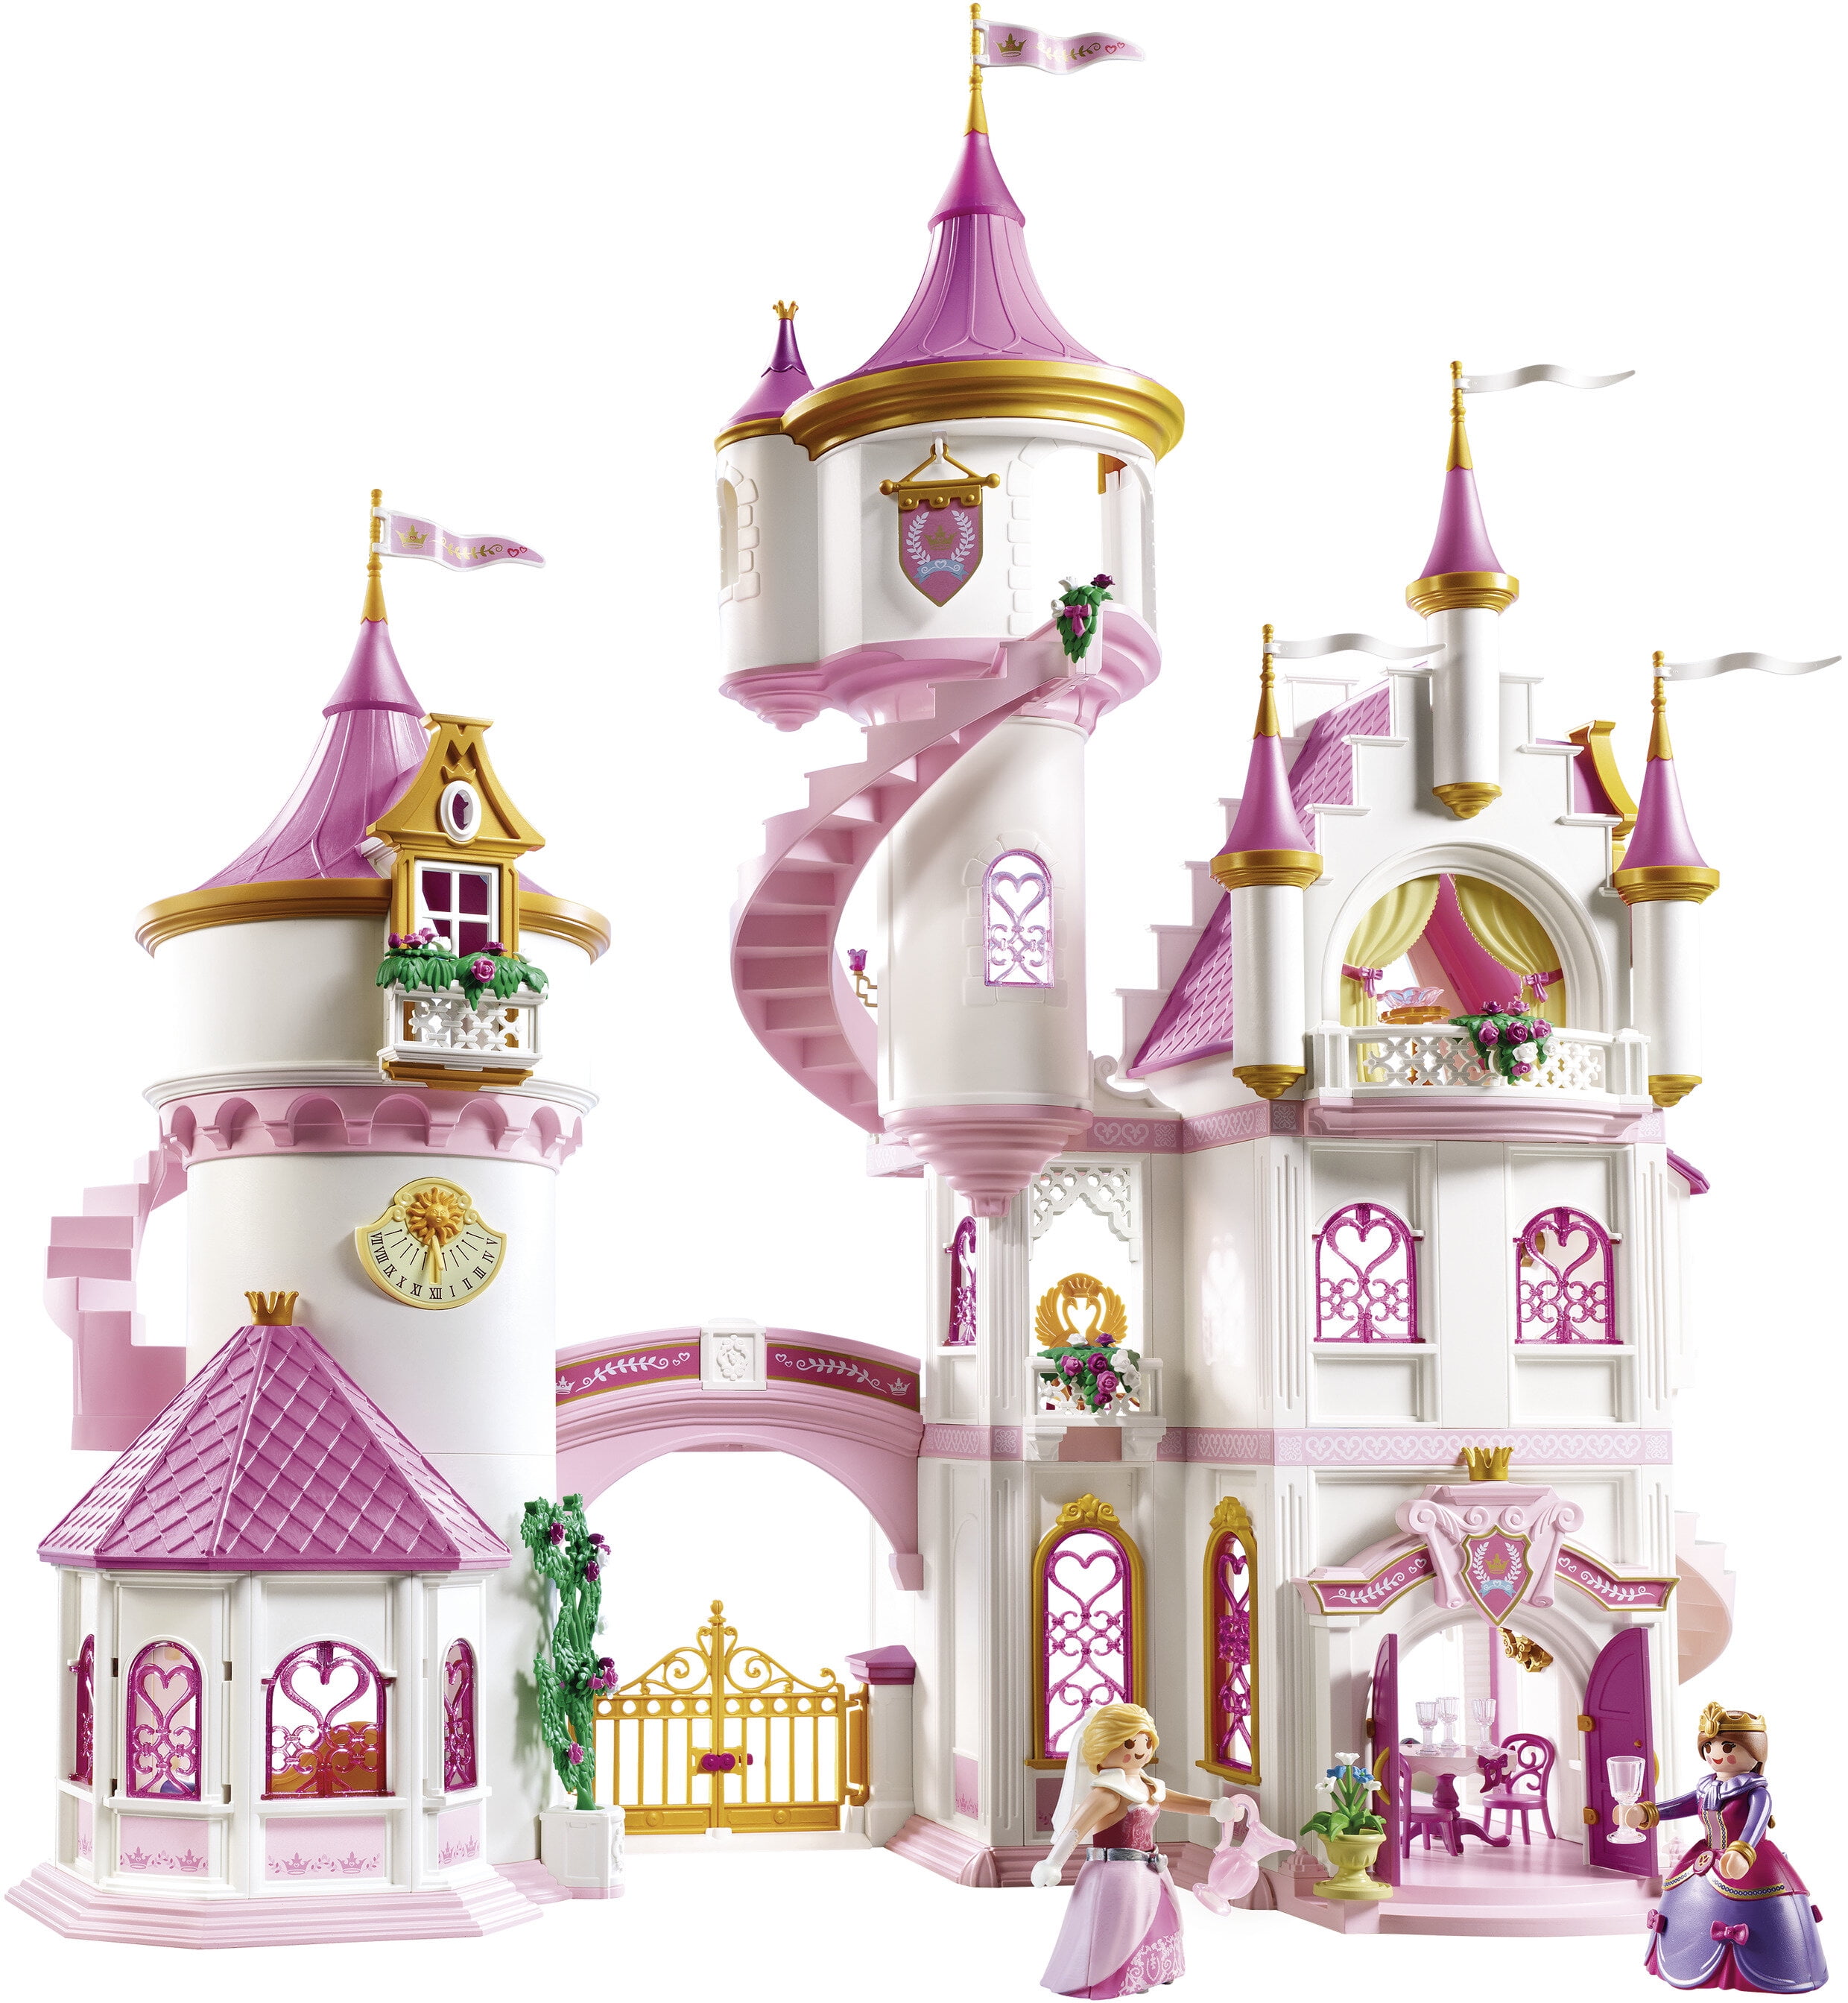 Fairy Tale Kingdom Wooden Building Blocks 50-piece Princess & Prince Play Toy Set in Storage Drum by Imagination Generation 